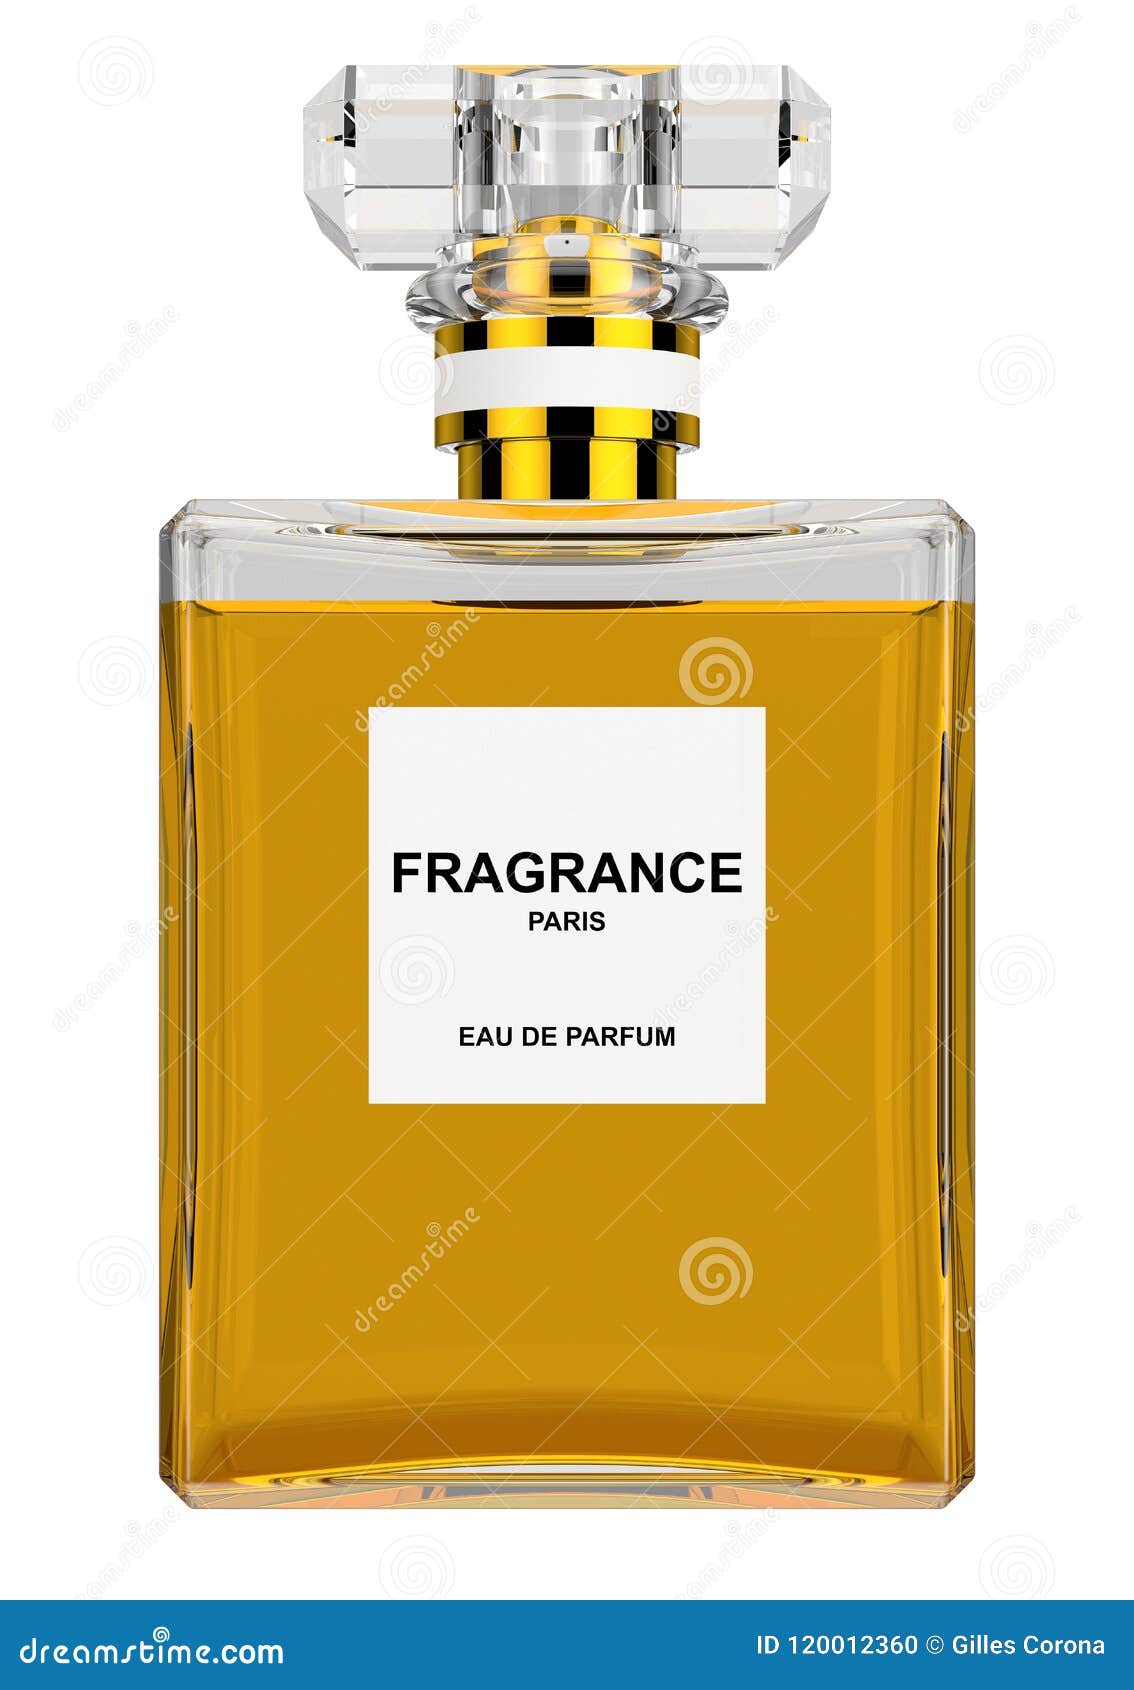 Chanel fragrance editorial stock photo. Image of color - 121469688